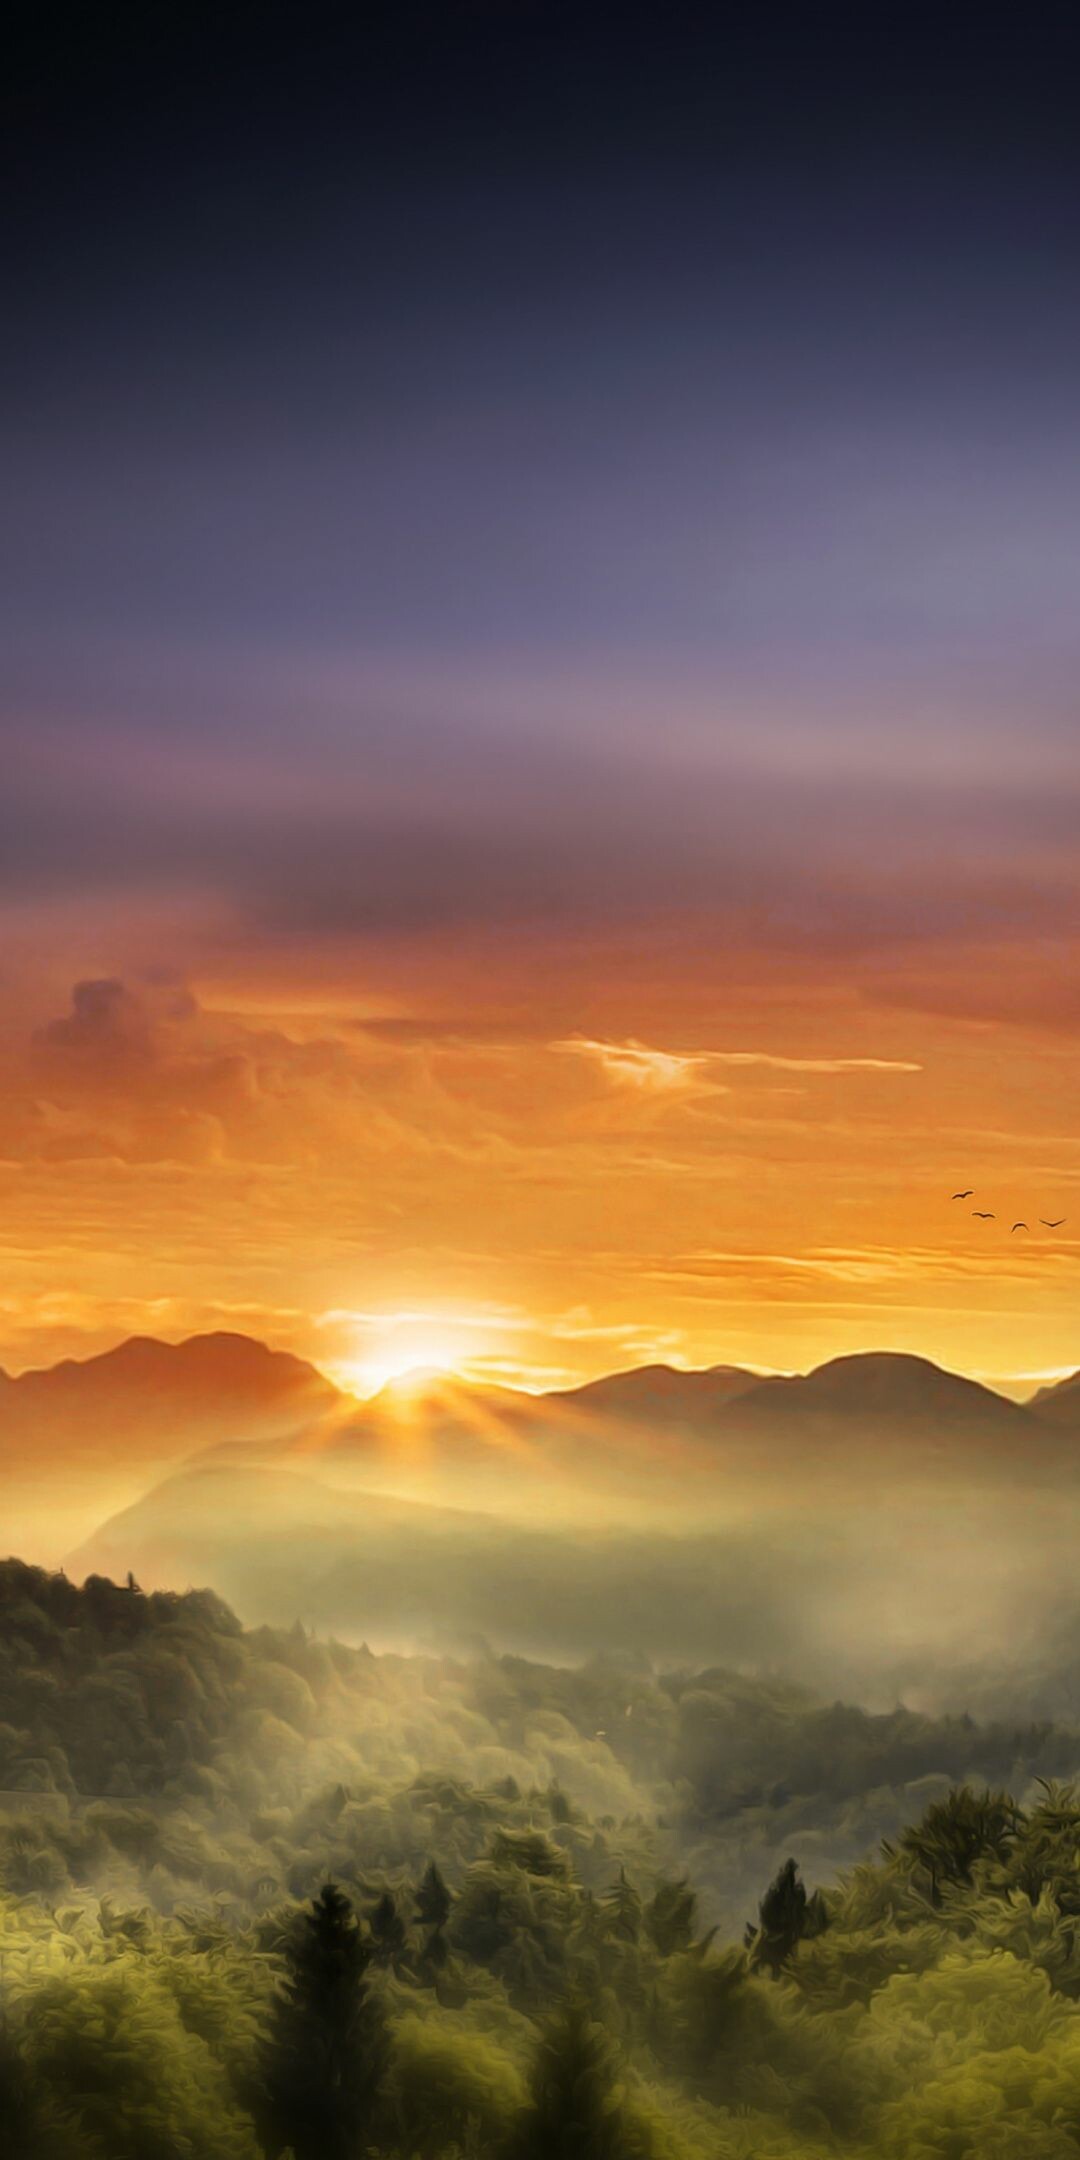 Sunrise: Crack of dawn, The scattering of sunlight at the mountain peaks. 1080x2160 HD Wallpaper.